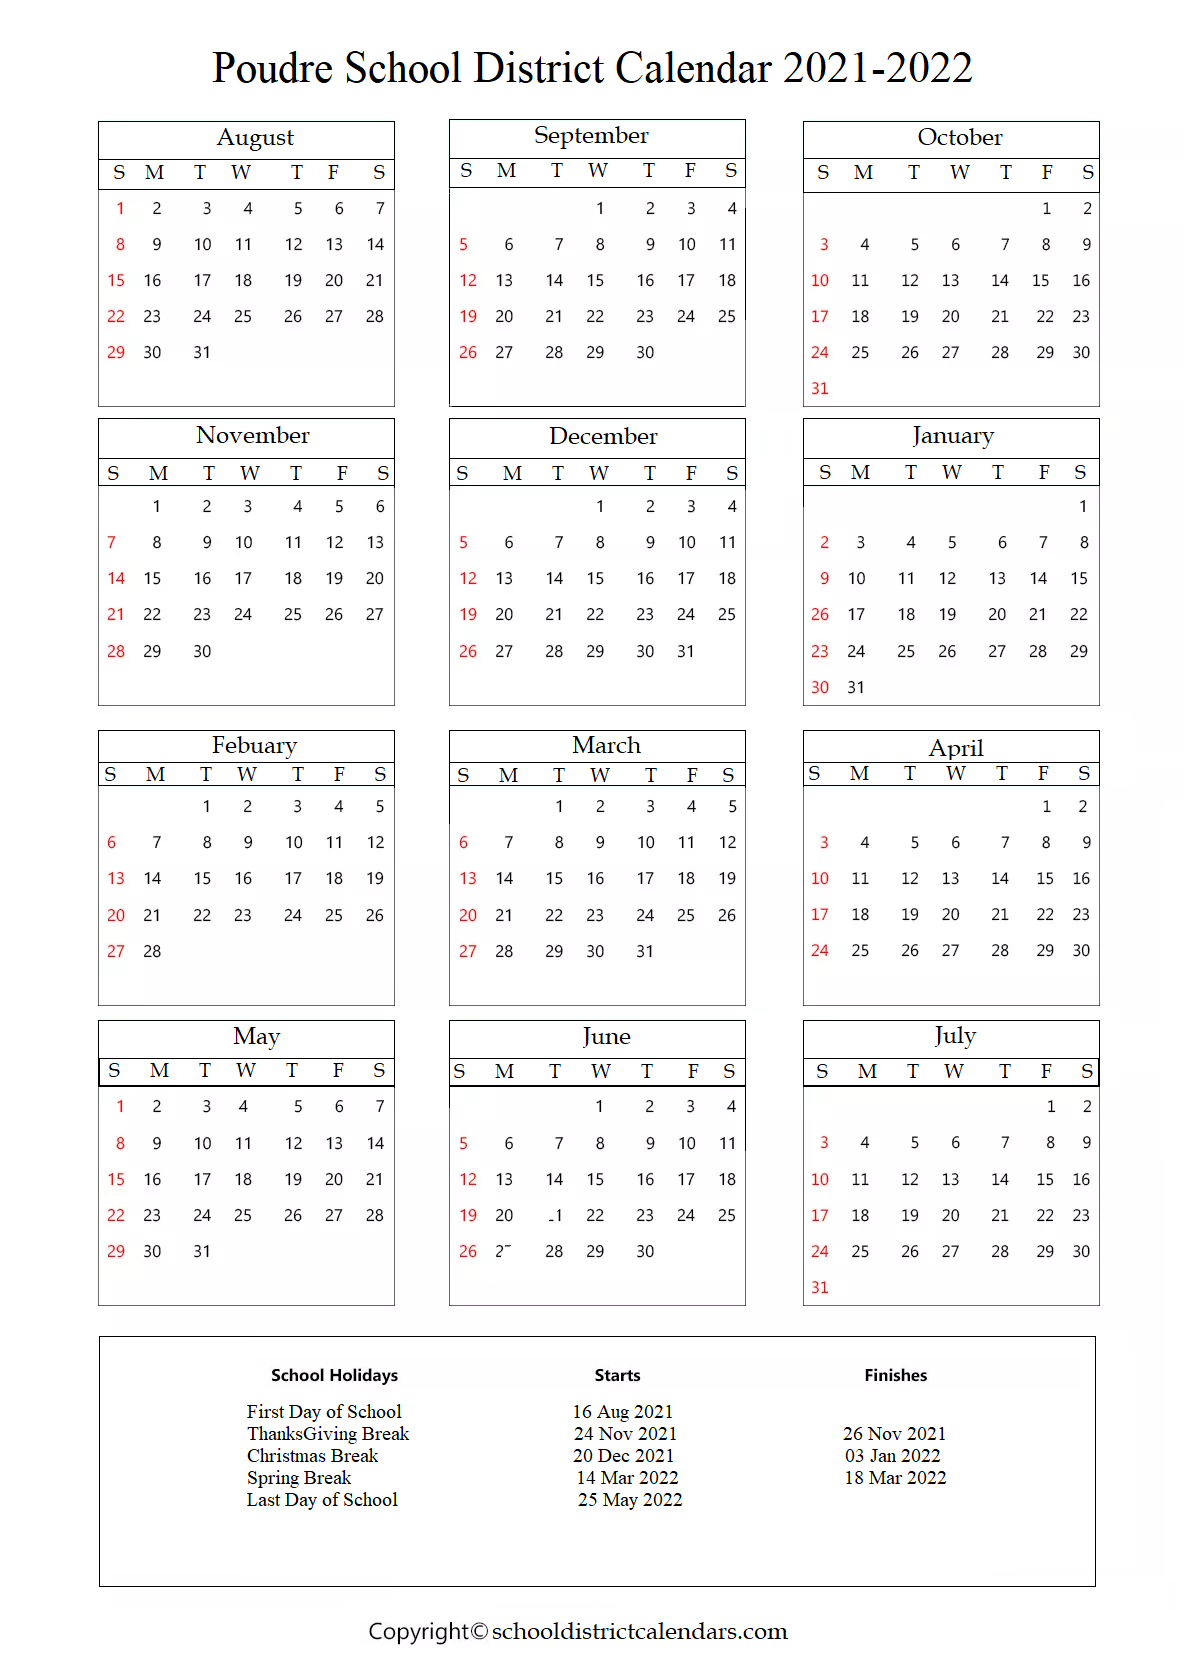 Poudre School District Calendar 2021-2022 With Holidays In-2021 Vacation Schedule Forms